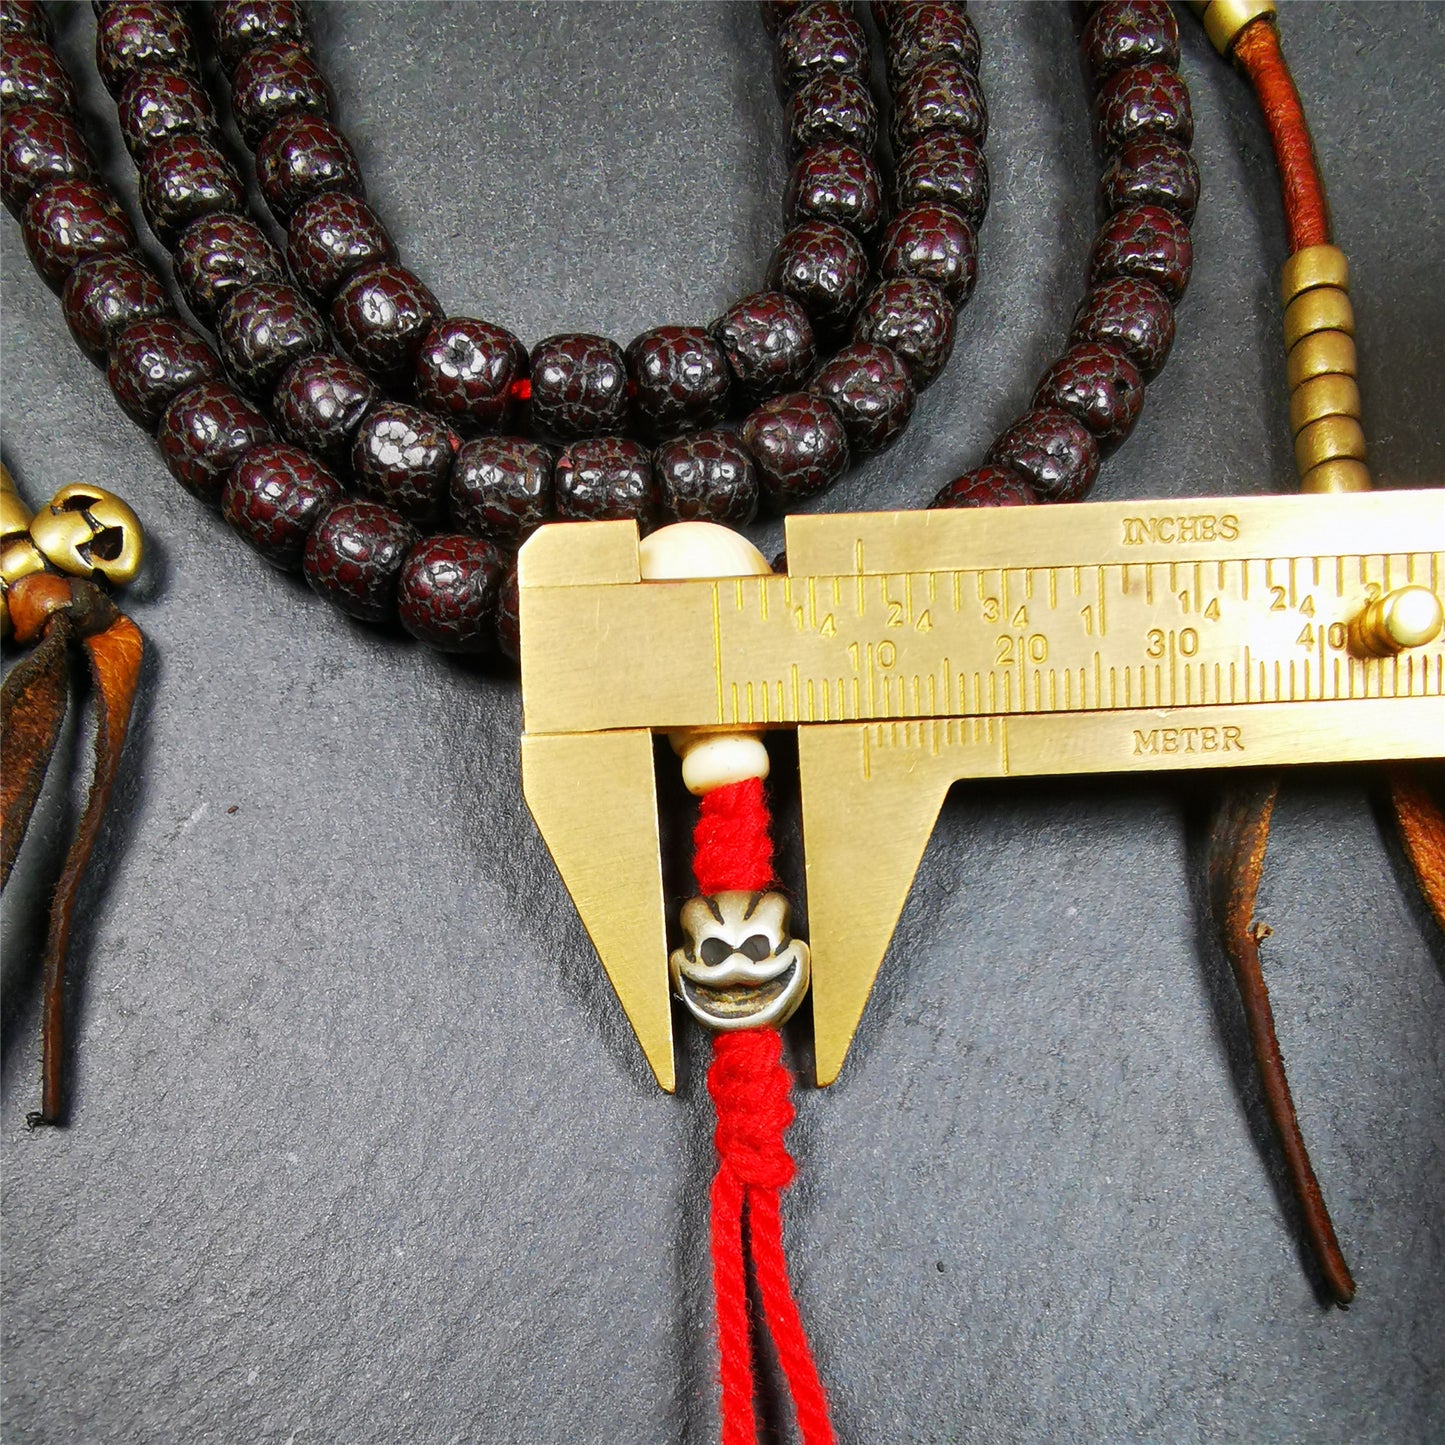 This mala is made by Tibetan craftsmen and come from Hepo Town, Baiyu County,Tibet, the birthplace of the famous Tibetan handicrafts,about 30 years old,blessed by a lama in Baiyu Monastery. It's made of lotus seed beads,brown color,with 1 pair of copper bead counters, and a cold iron skull bead on the tail.